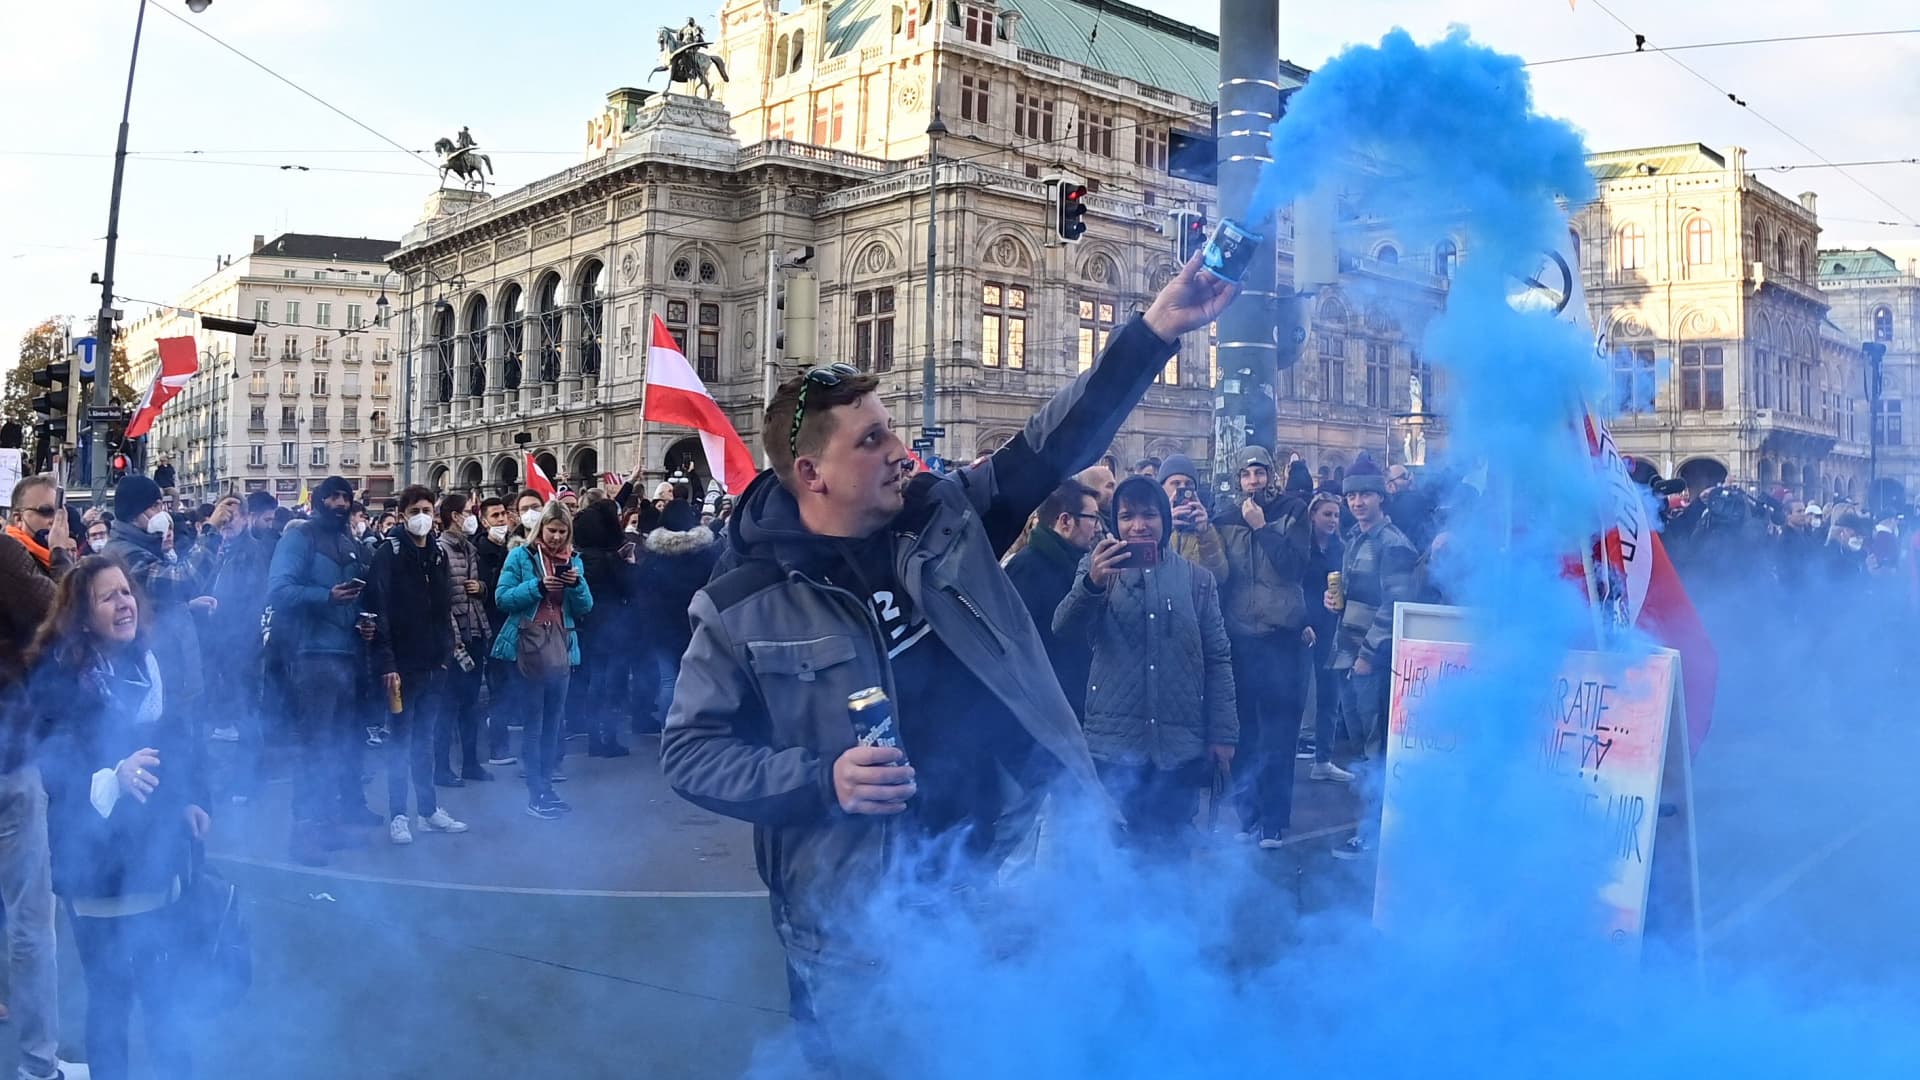 A demonstrator lights a smoke bomb during a rally held by Austria's far-right Freedom Party FPOe against the measures taken to curb the Covid pandemic, at Maria Theresien Platz square in Vienna, Austria on November 20, 2021.